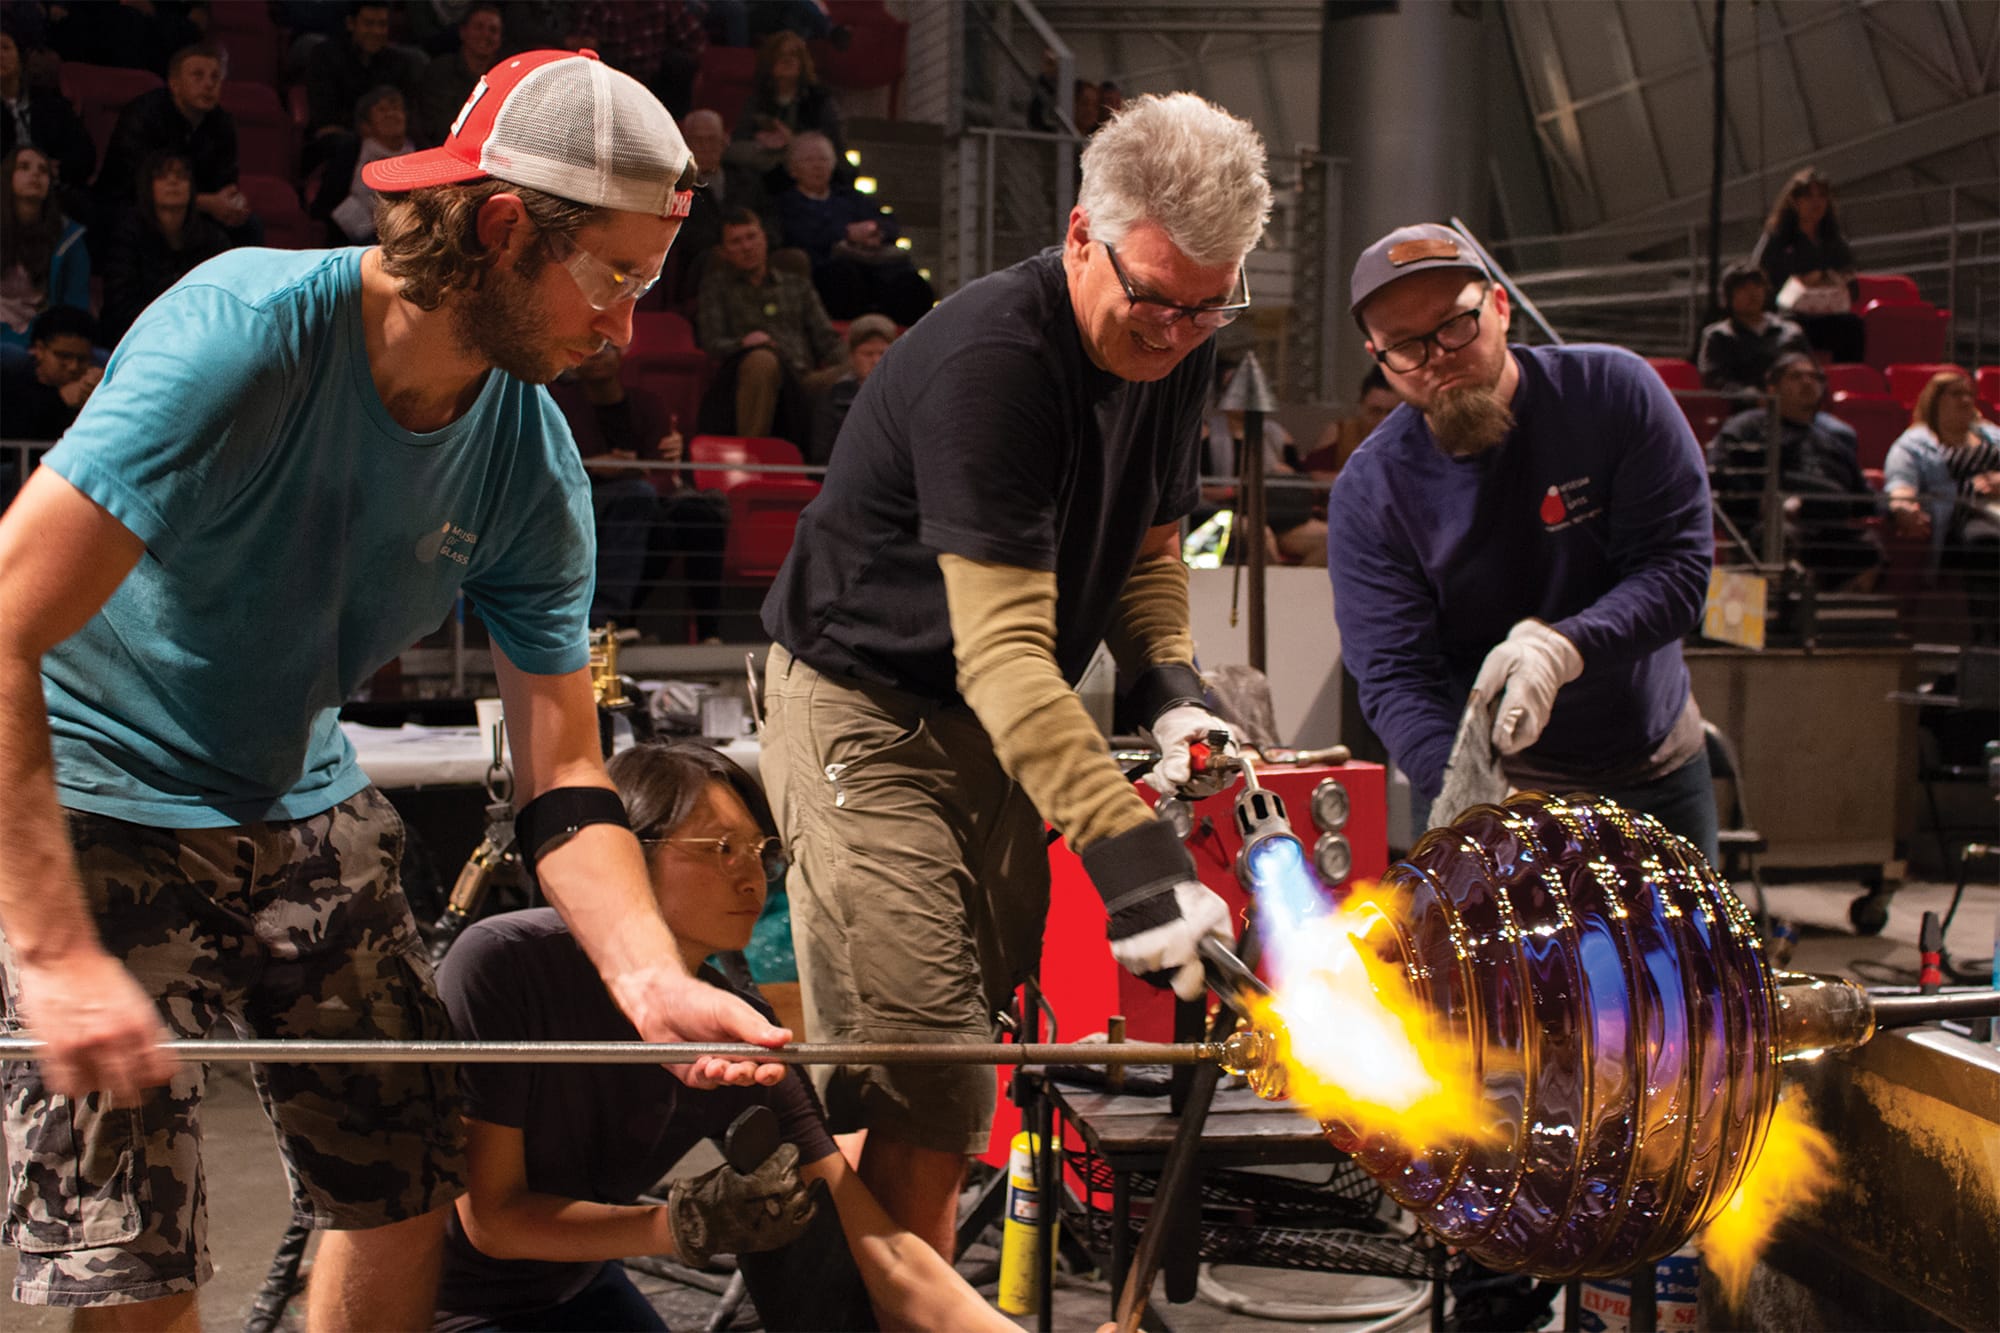 Glass artist Richard Royal and his team at work in the Hot Shop at the Museum of Glass in Tacoma.